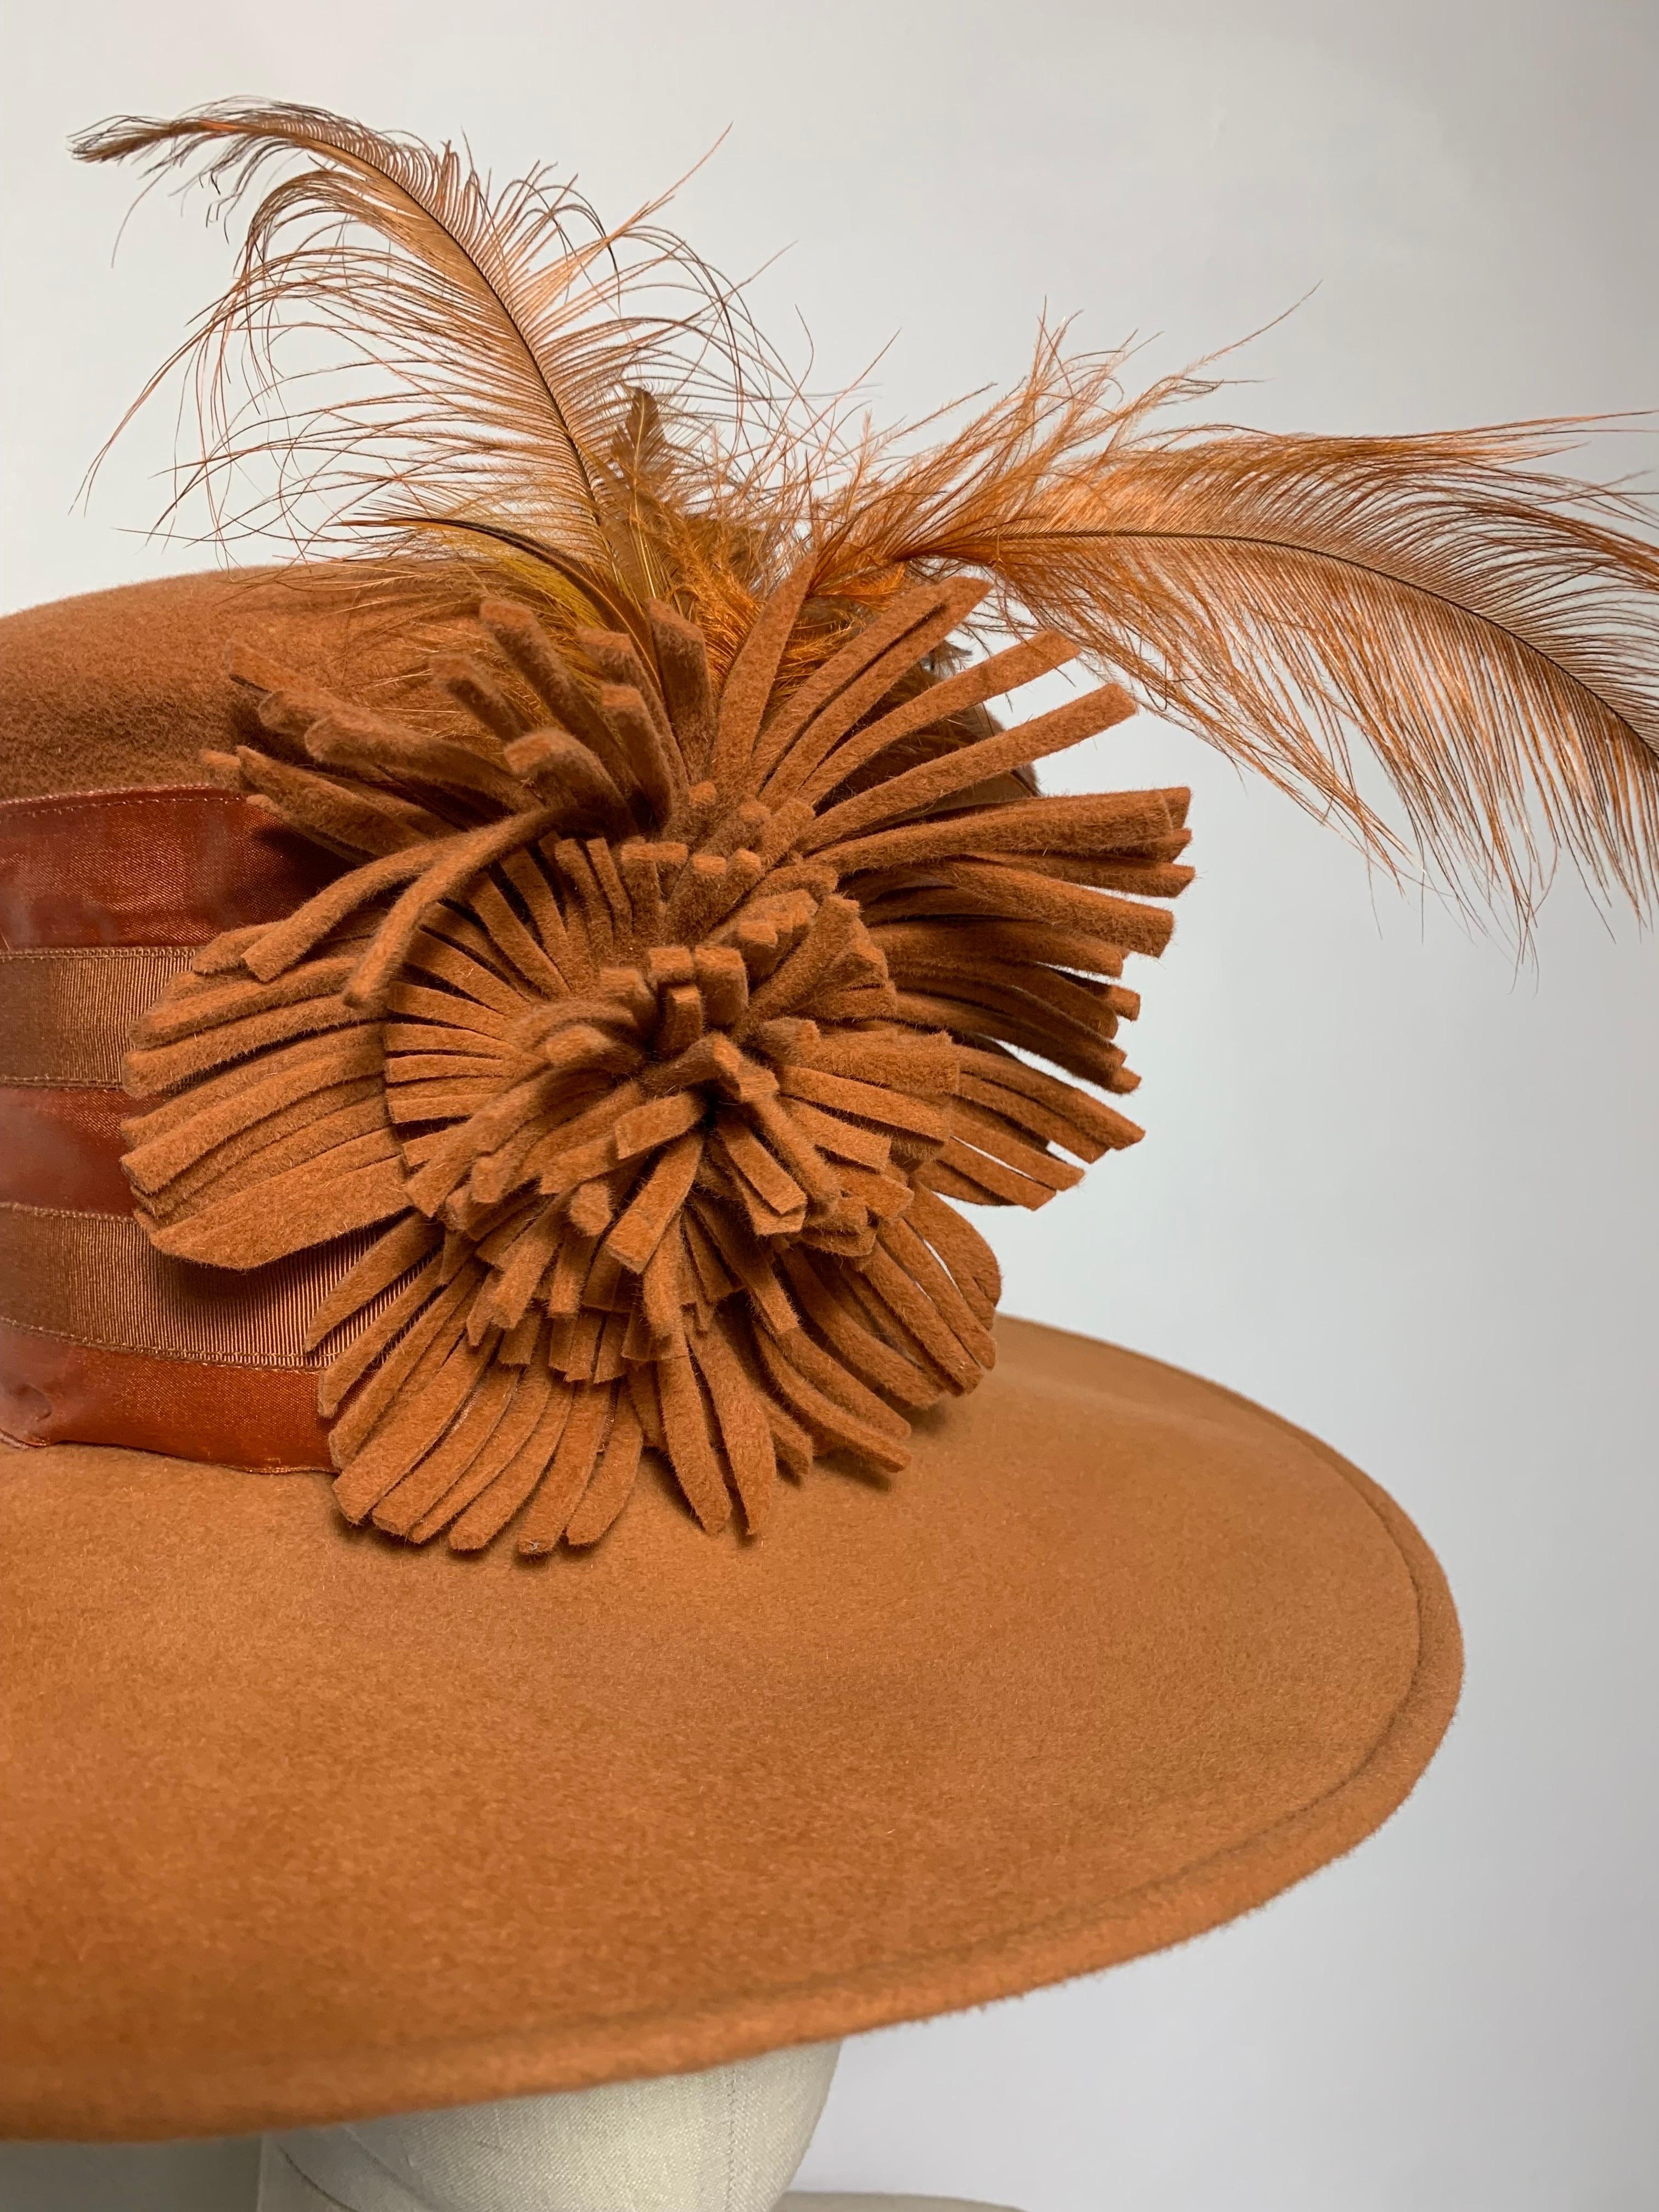 Maison Michel Autumn/Winter Medium Brim Copper Felt  Beautifully Blocked High Top Hat with Matching Flower, Feather and Wide Satin and Grosgrain Striped Band: Unlabeled, with attached combs for securing. Size 6 3/4 Medium. Made in France. 

Please